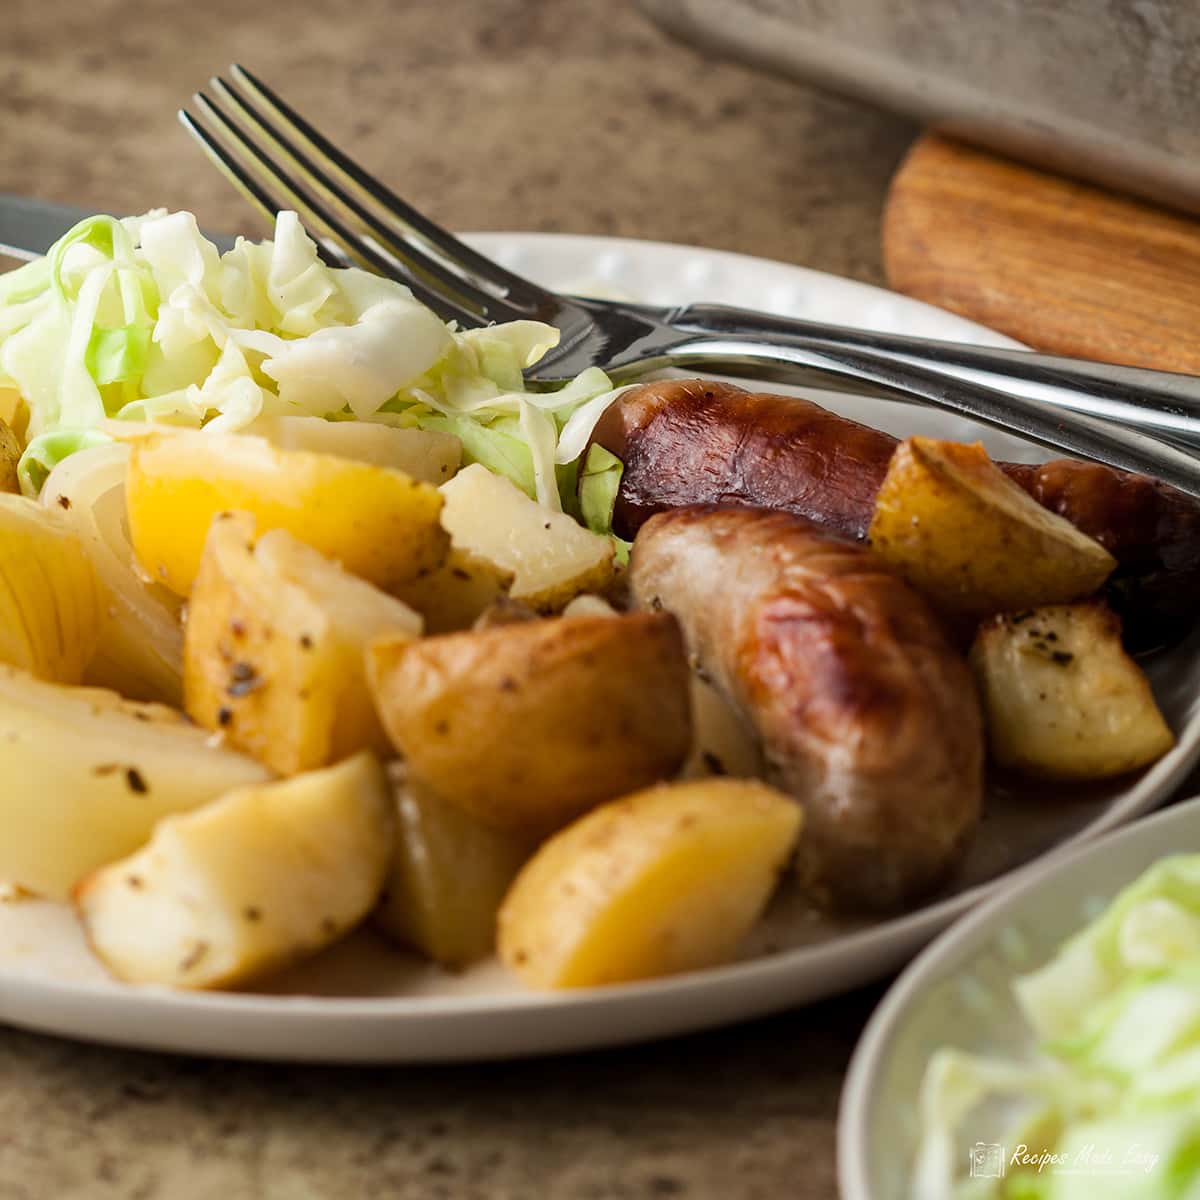 portion of sausage and apple casserole on plate with knife and fork